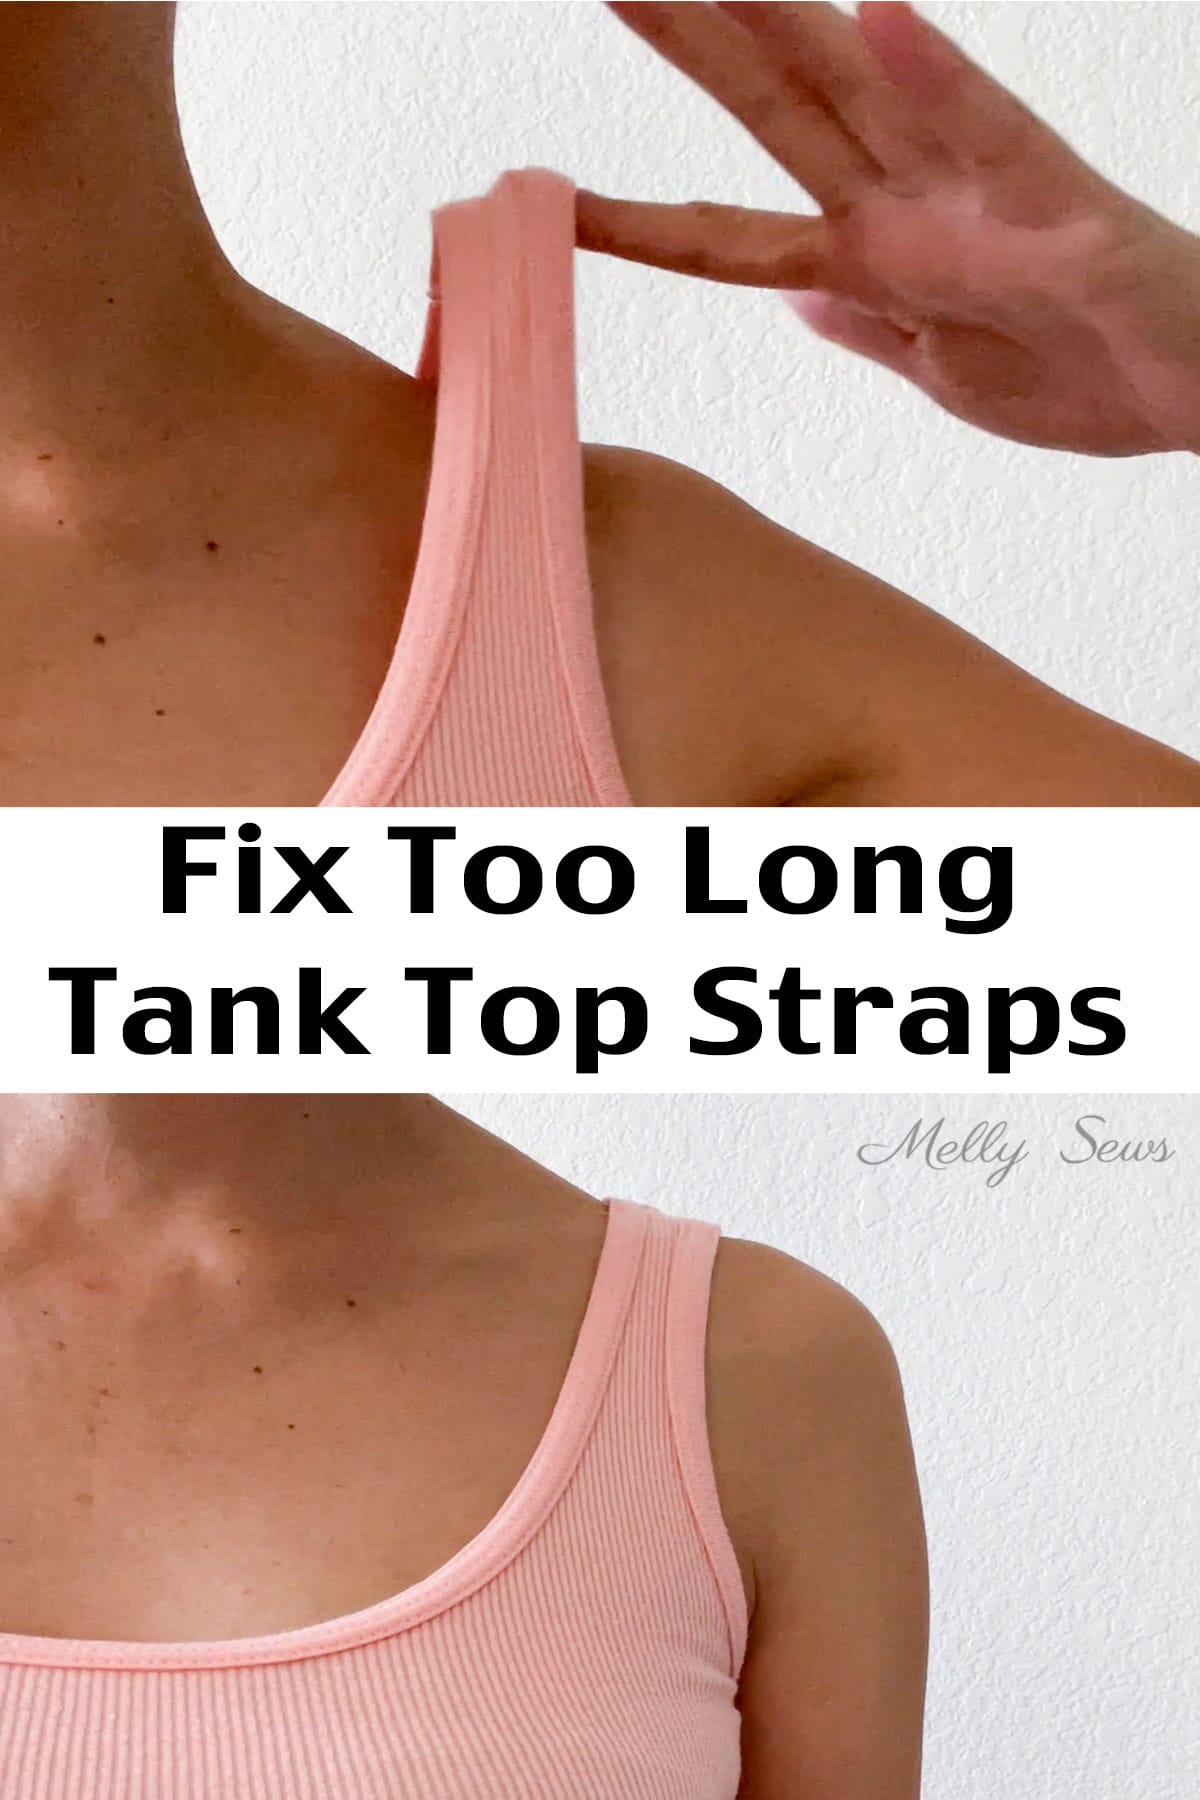 How to Shorten Dress Straps? - Sewing Team